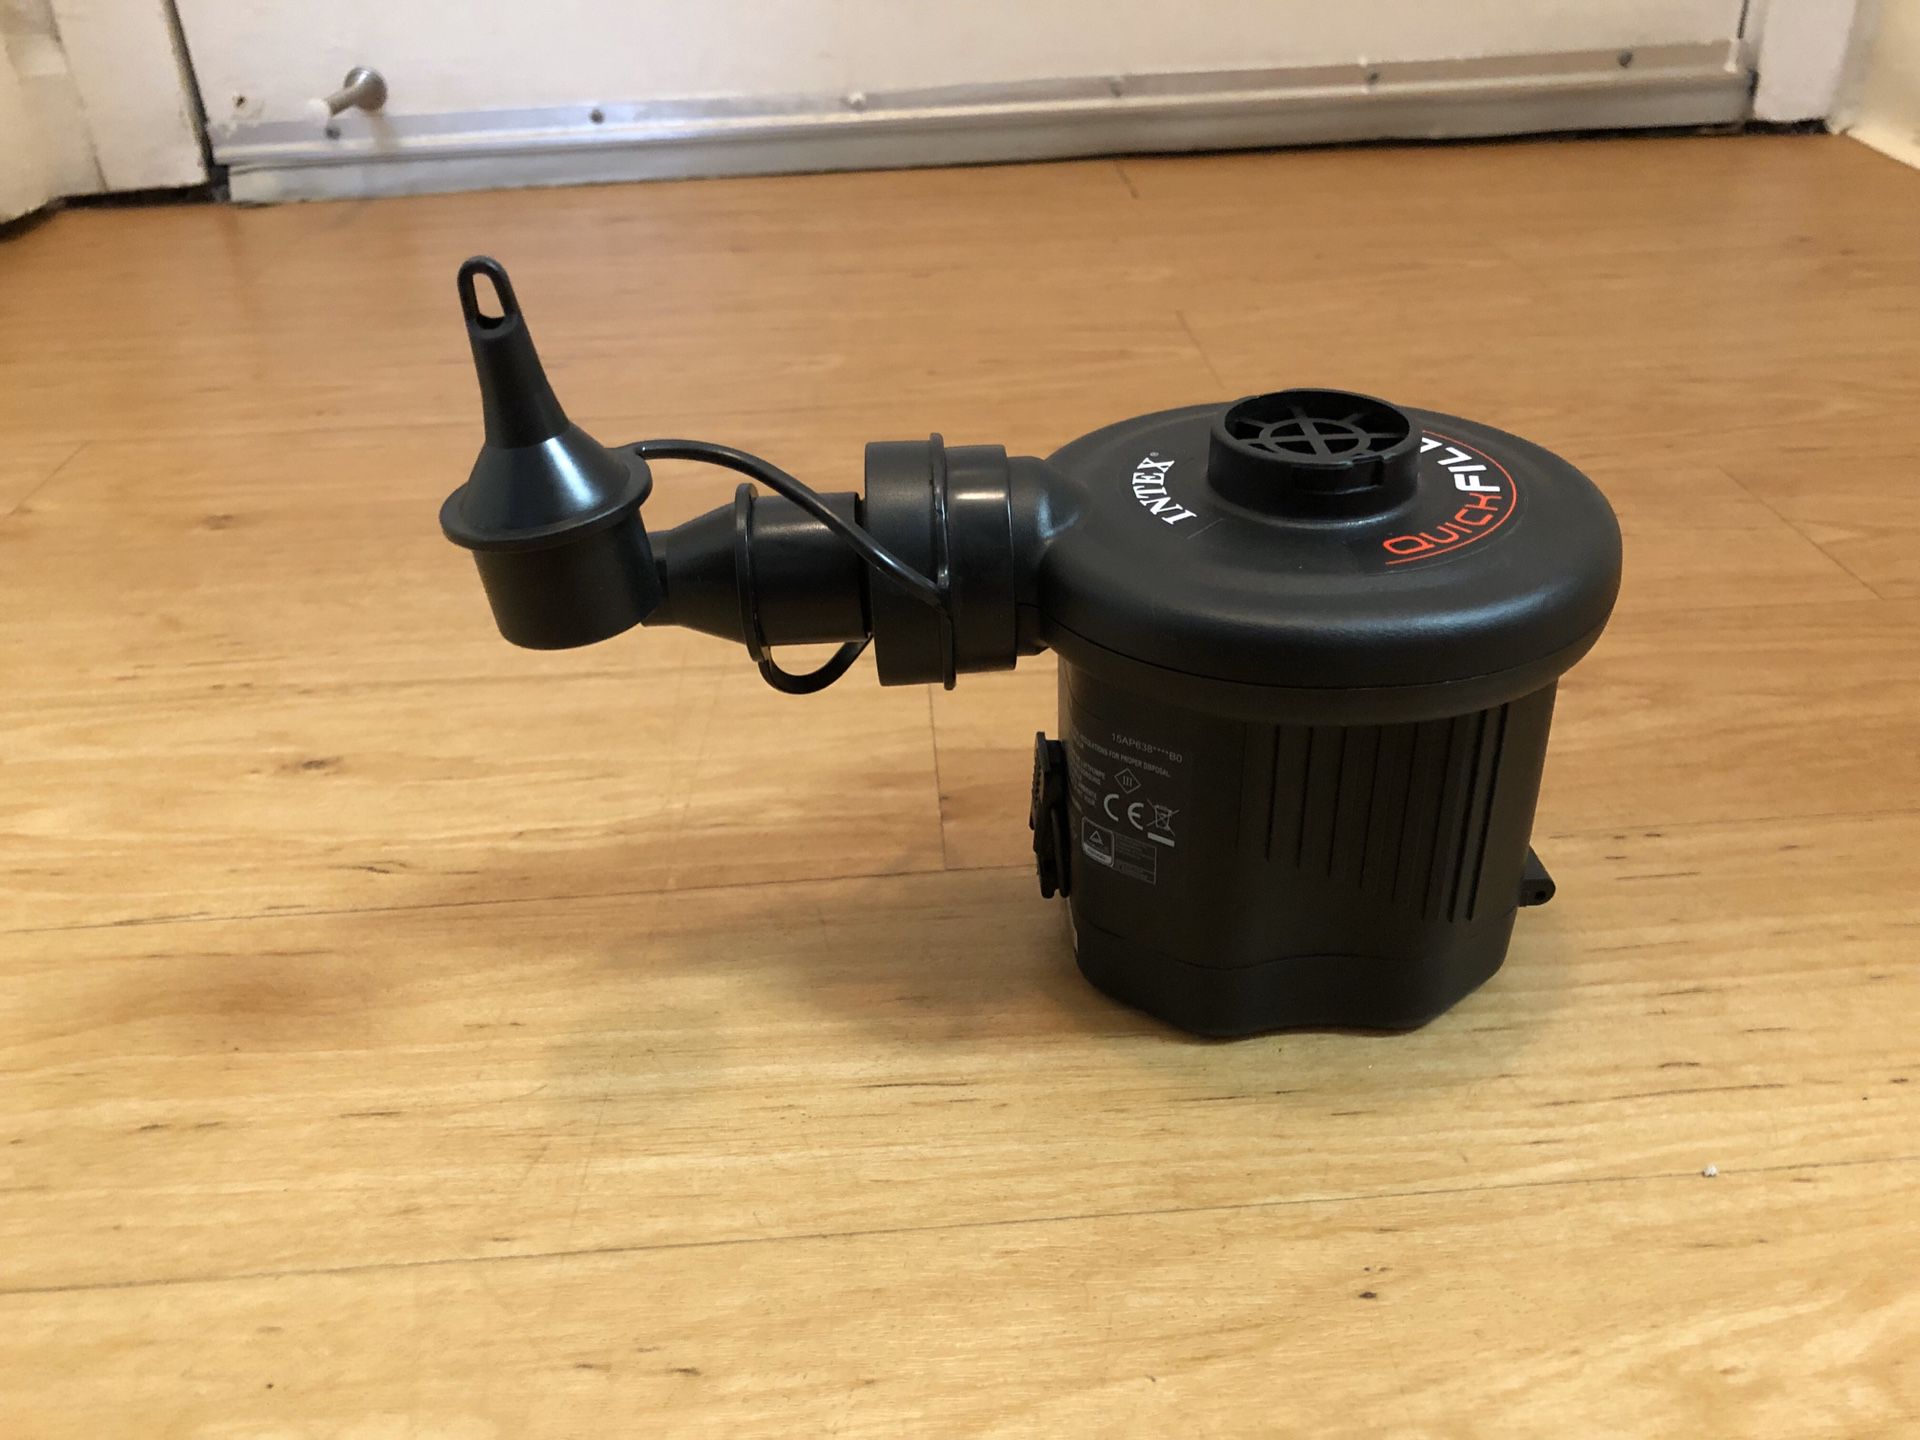 Battery operated pump for air mattresses